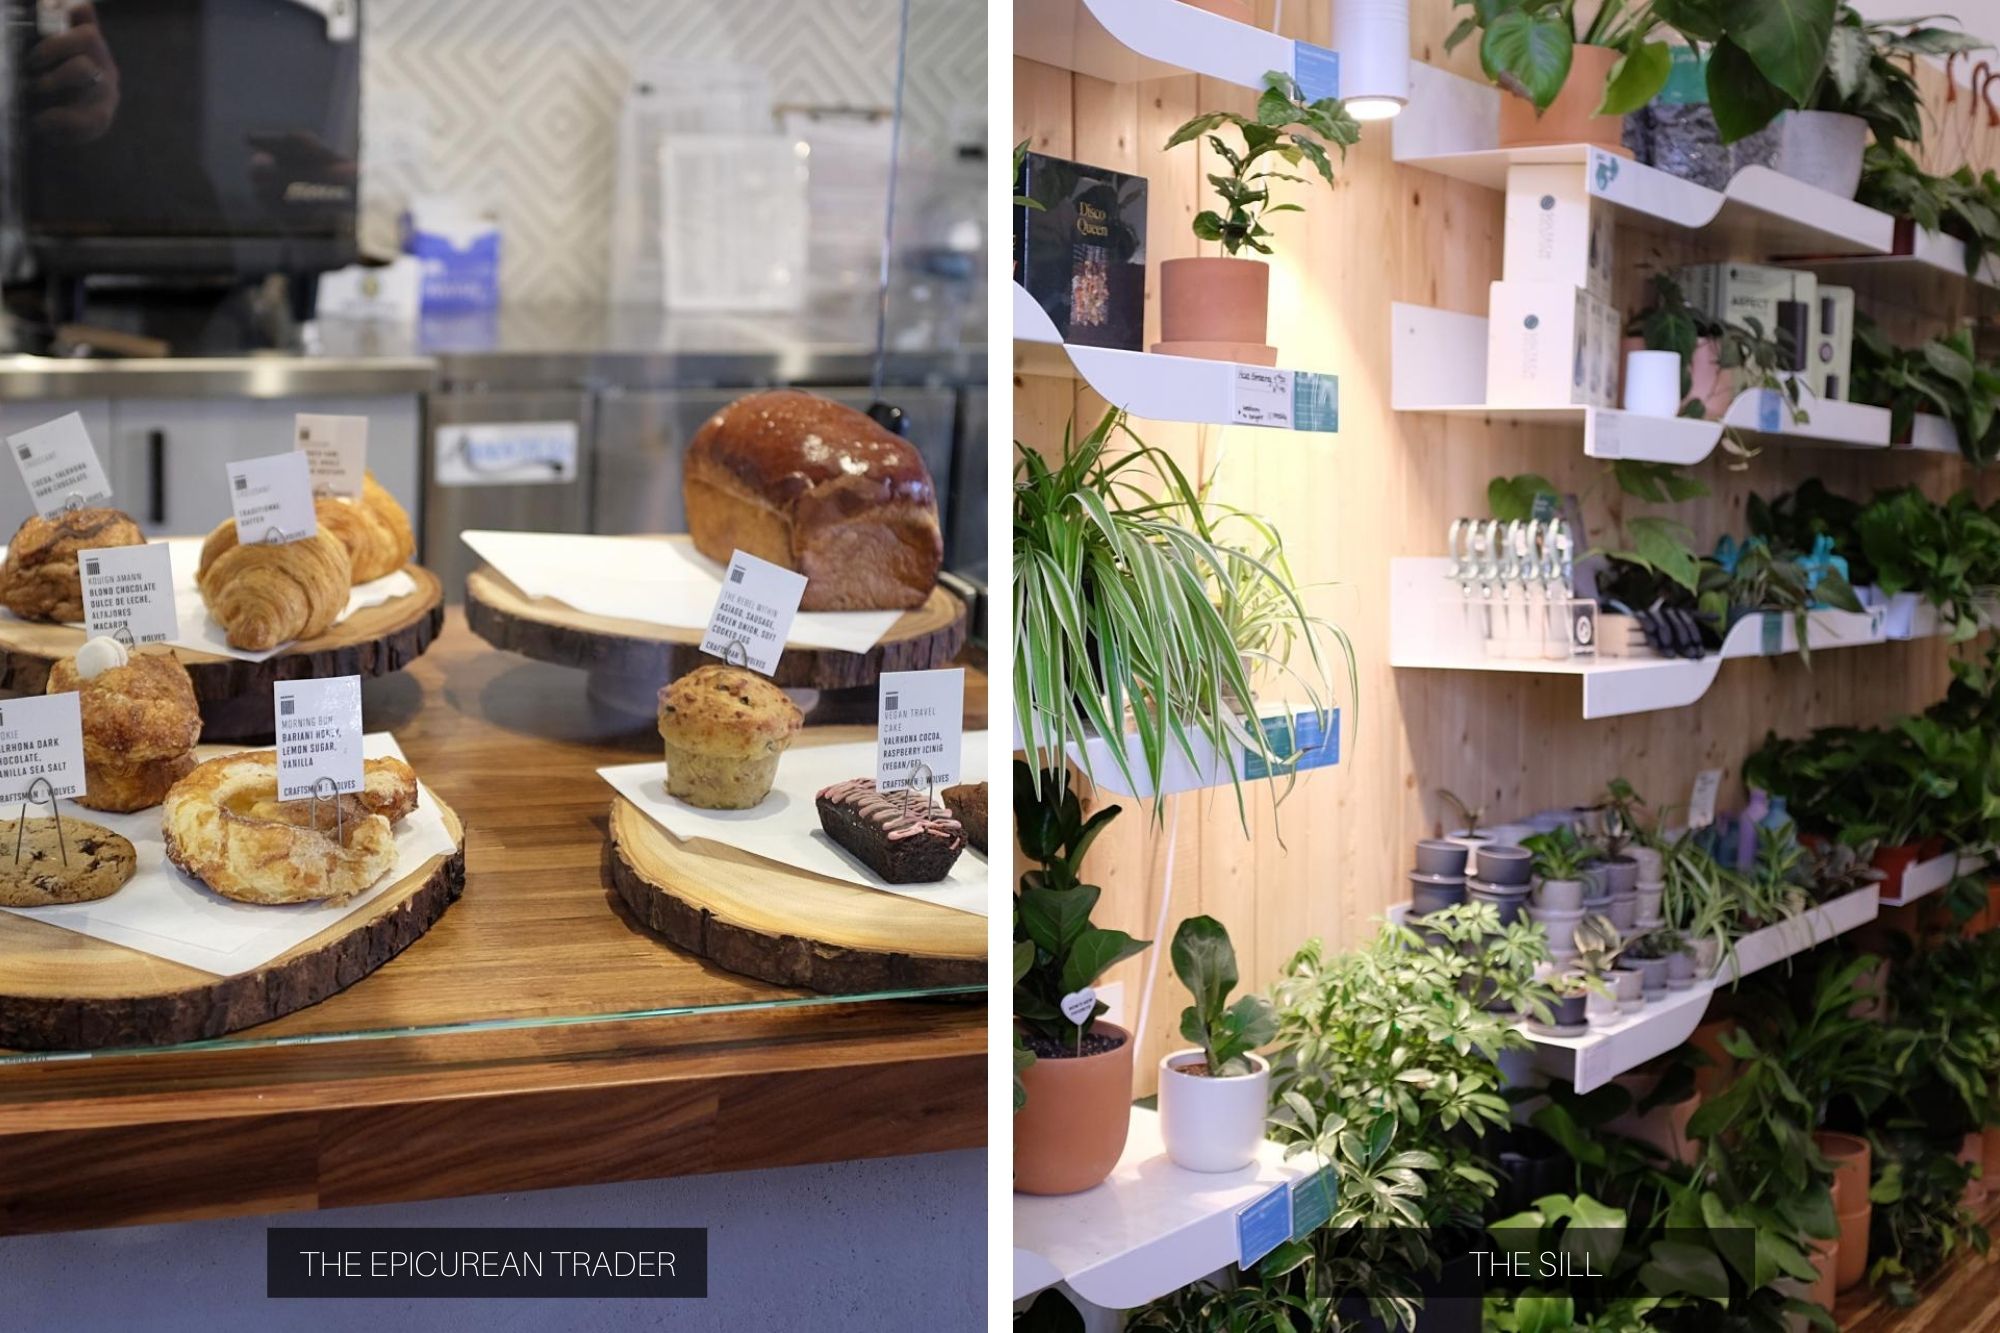 Left: pastries at The Epicurean Trader, Right: plants at The Sill